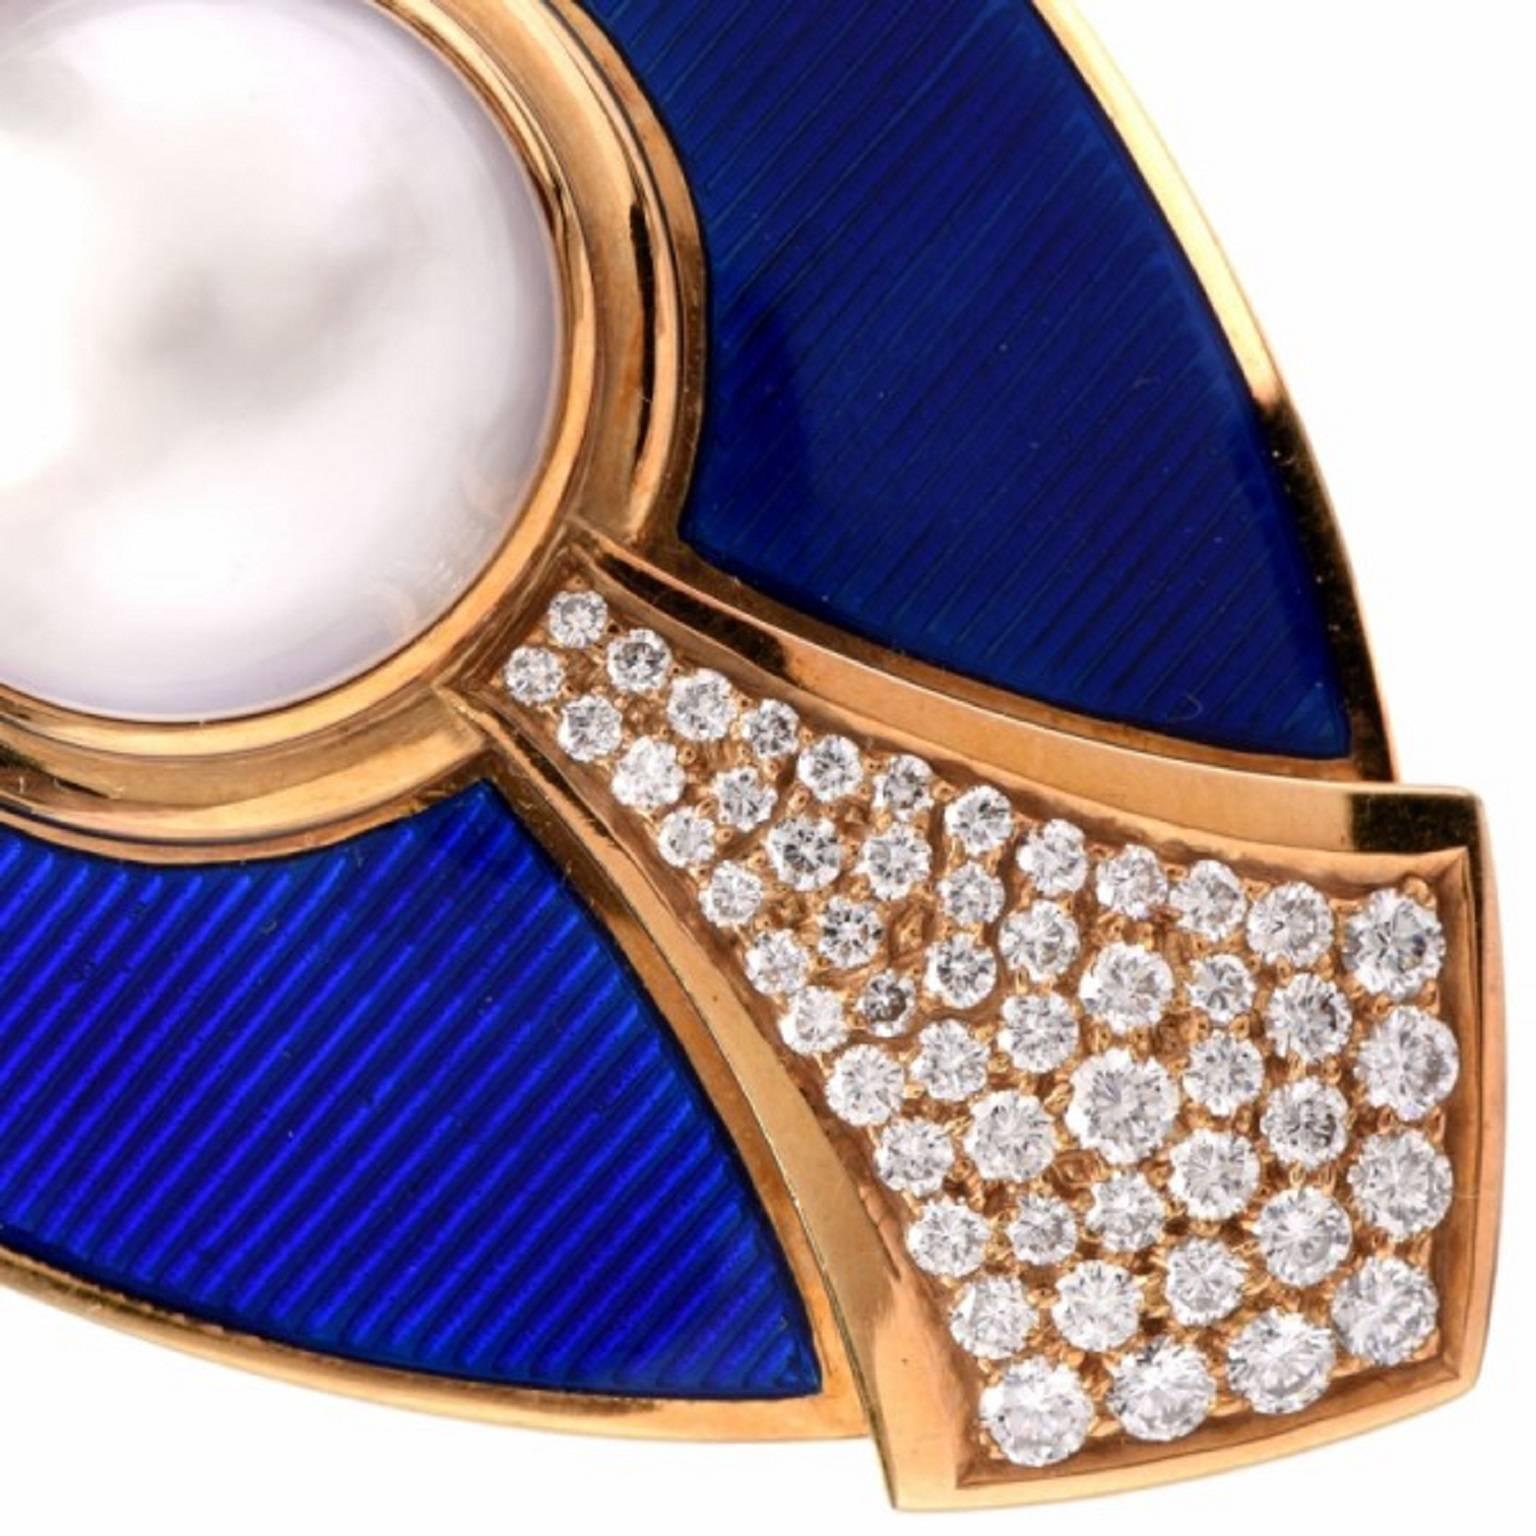 This enamel brooch with a South Sea half-pearl and pave diamonds is of English provenance, bearing the official Assay Mark of London . the goldsmith's initials L.D.V and the purity mark '750' on the side dimension. It is crafted in solid 18K yellow